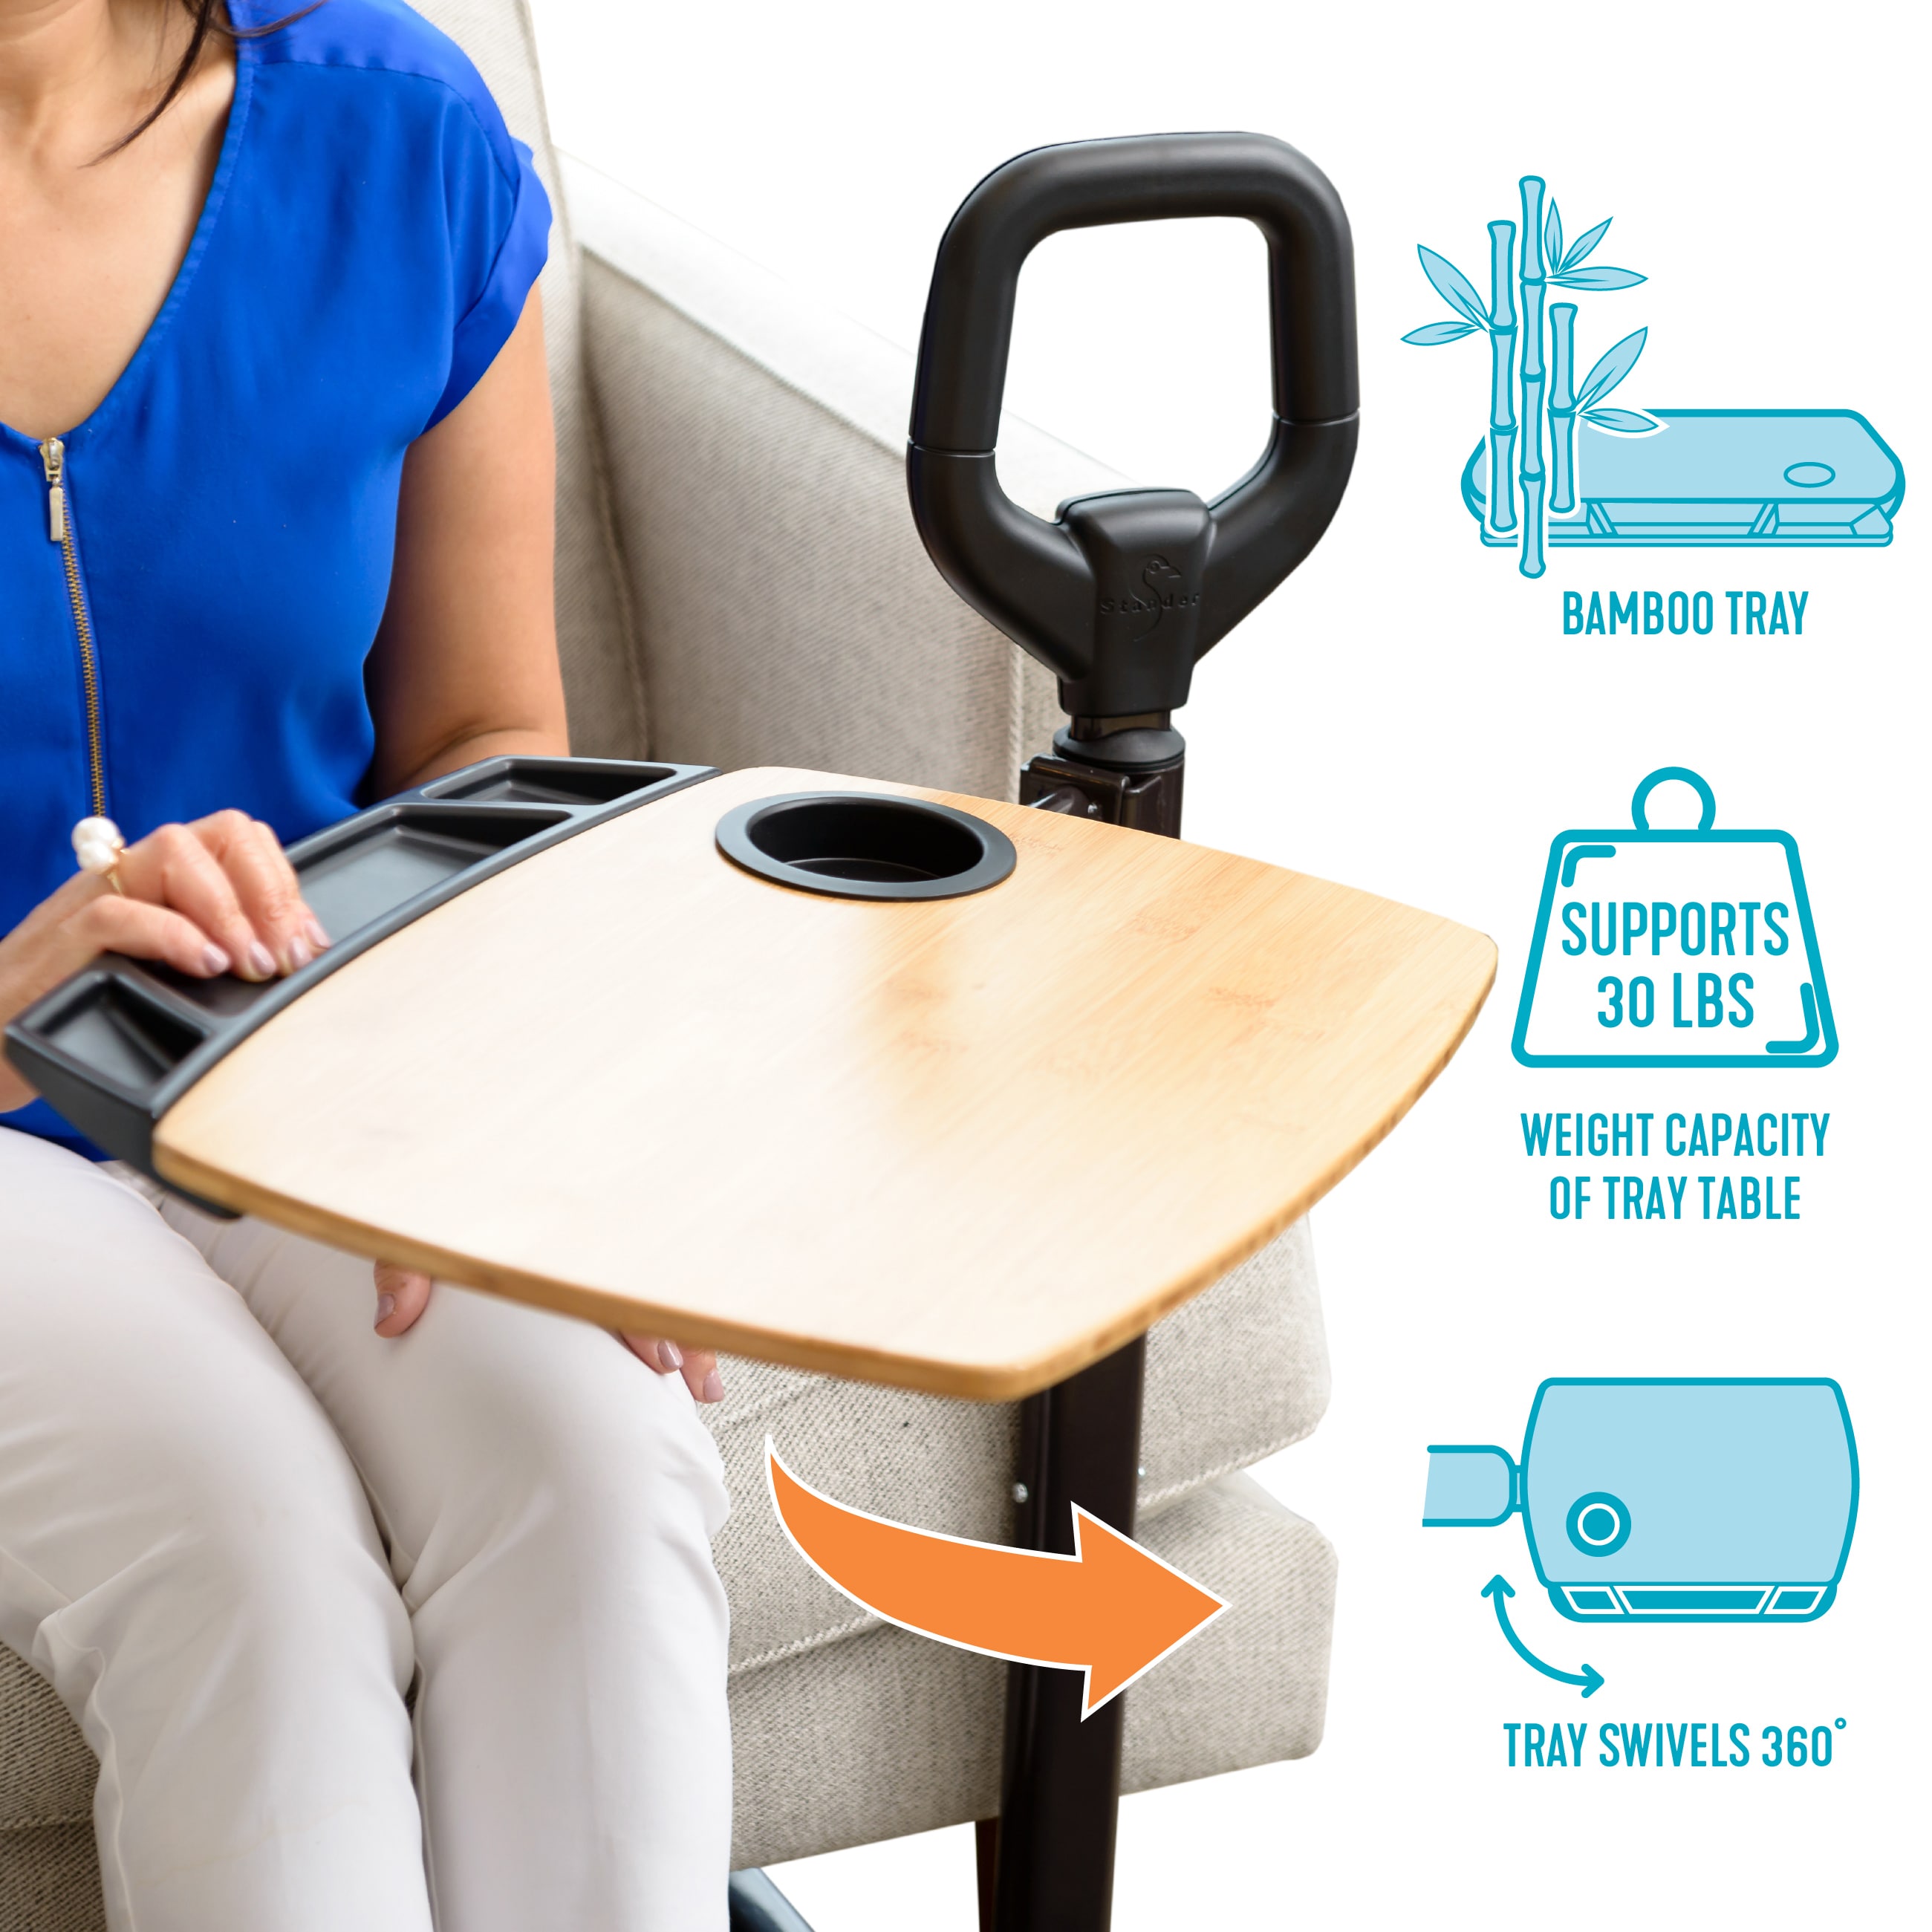 Able Life Able Tray Table, Adjustable Bamboo Swivel TV and Laptop Table  with Ergonomic Stand Assist Safety Handle, Independent Living Aid